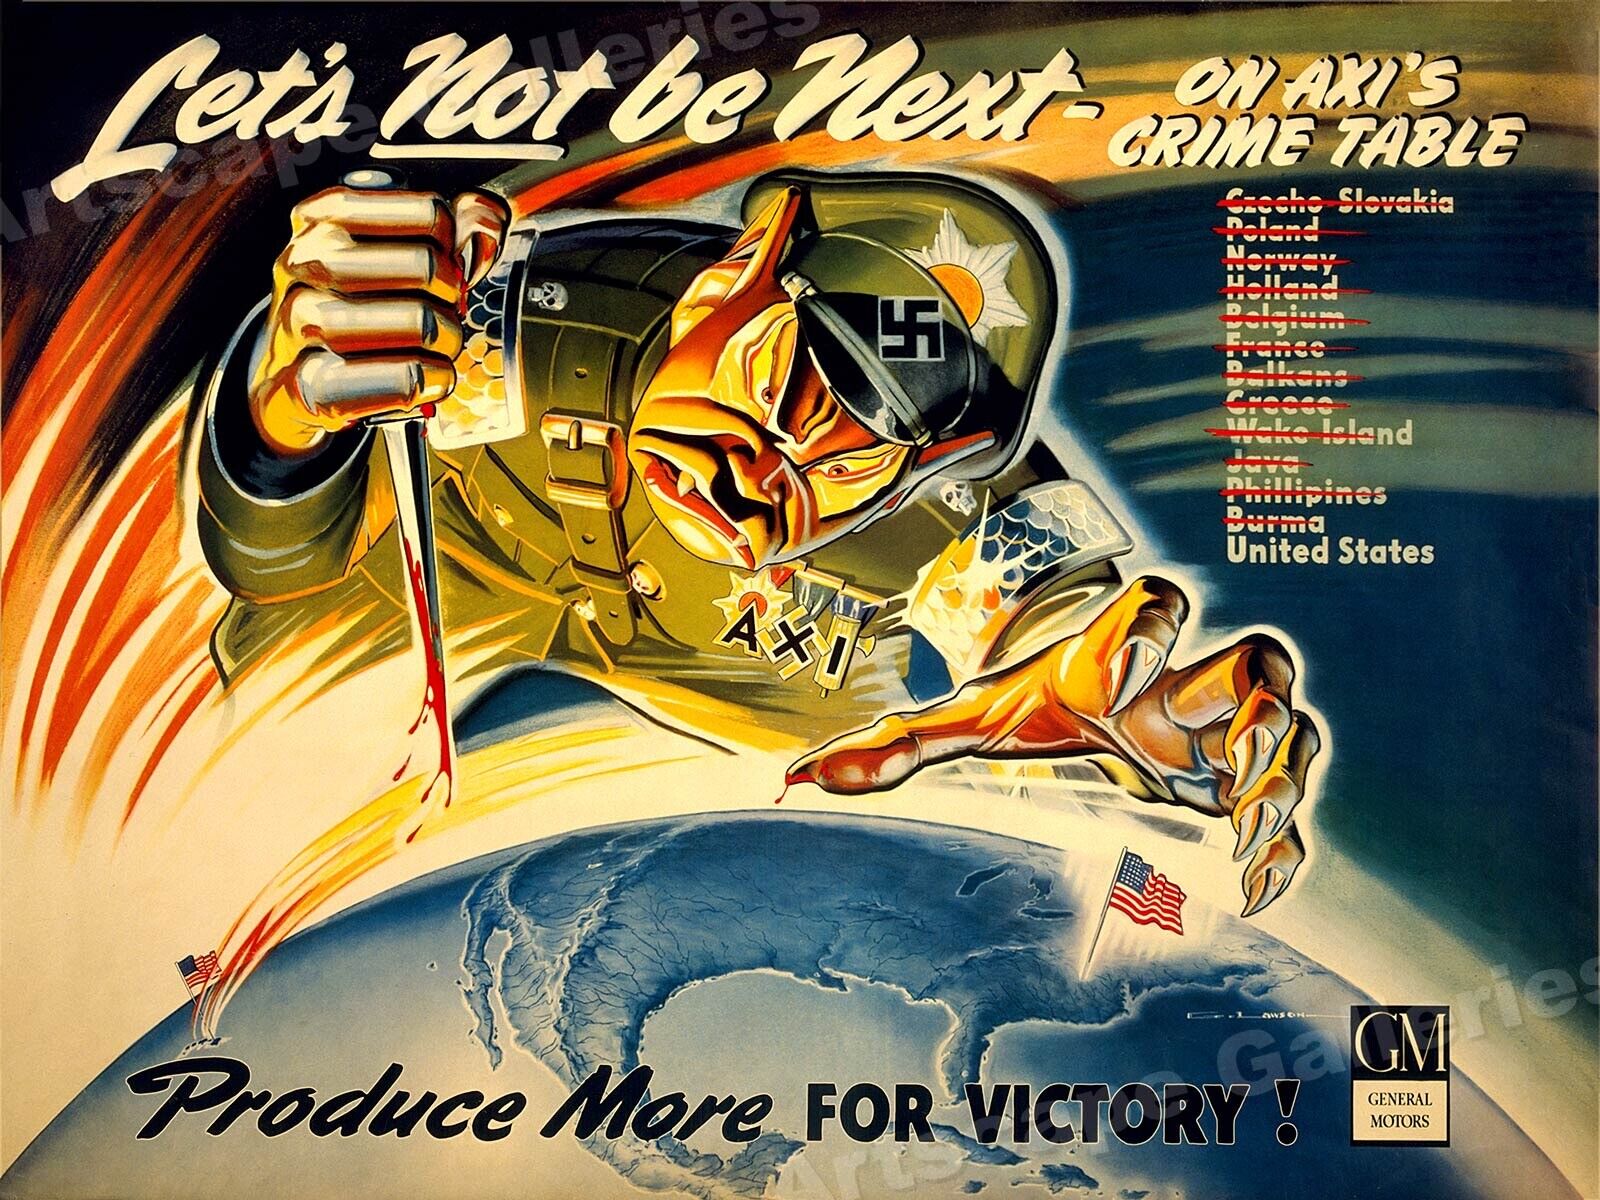 Defeat Axis Let's Not Be Next - Vintage Style WW2 Poster - 24x32